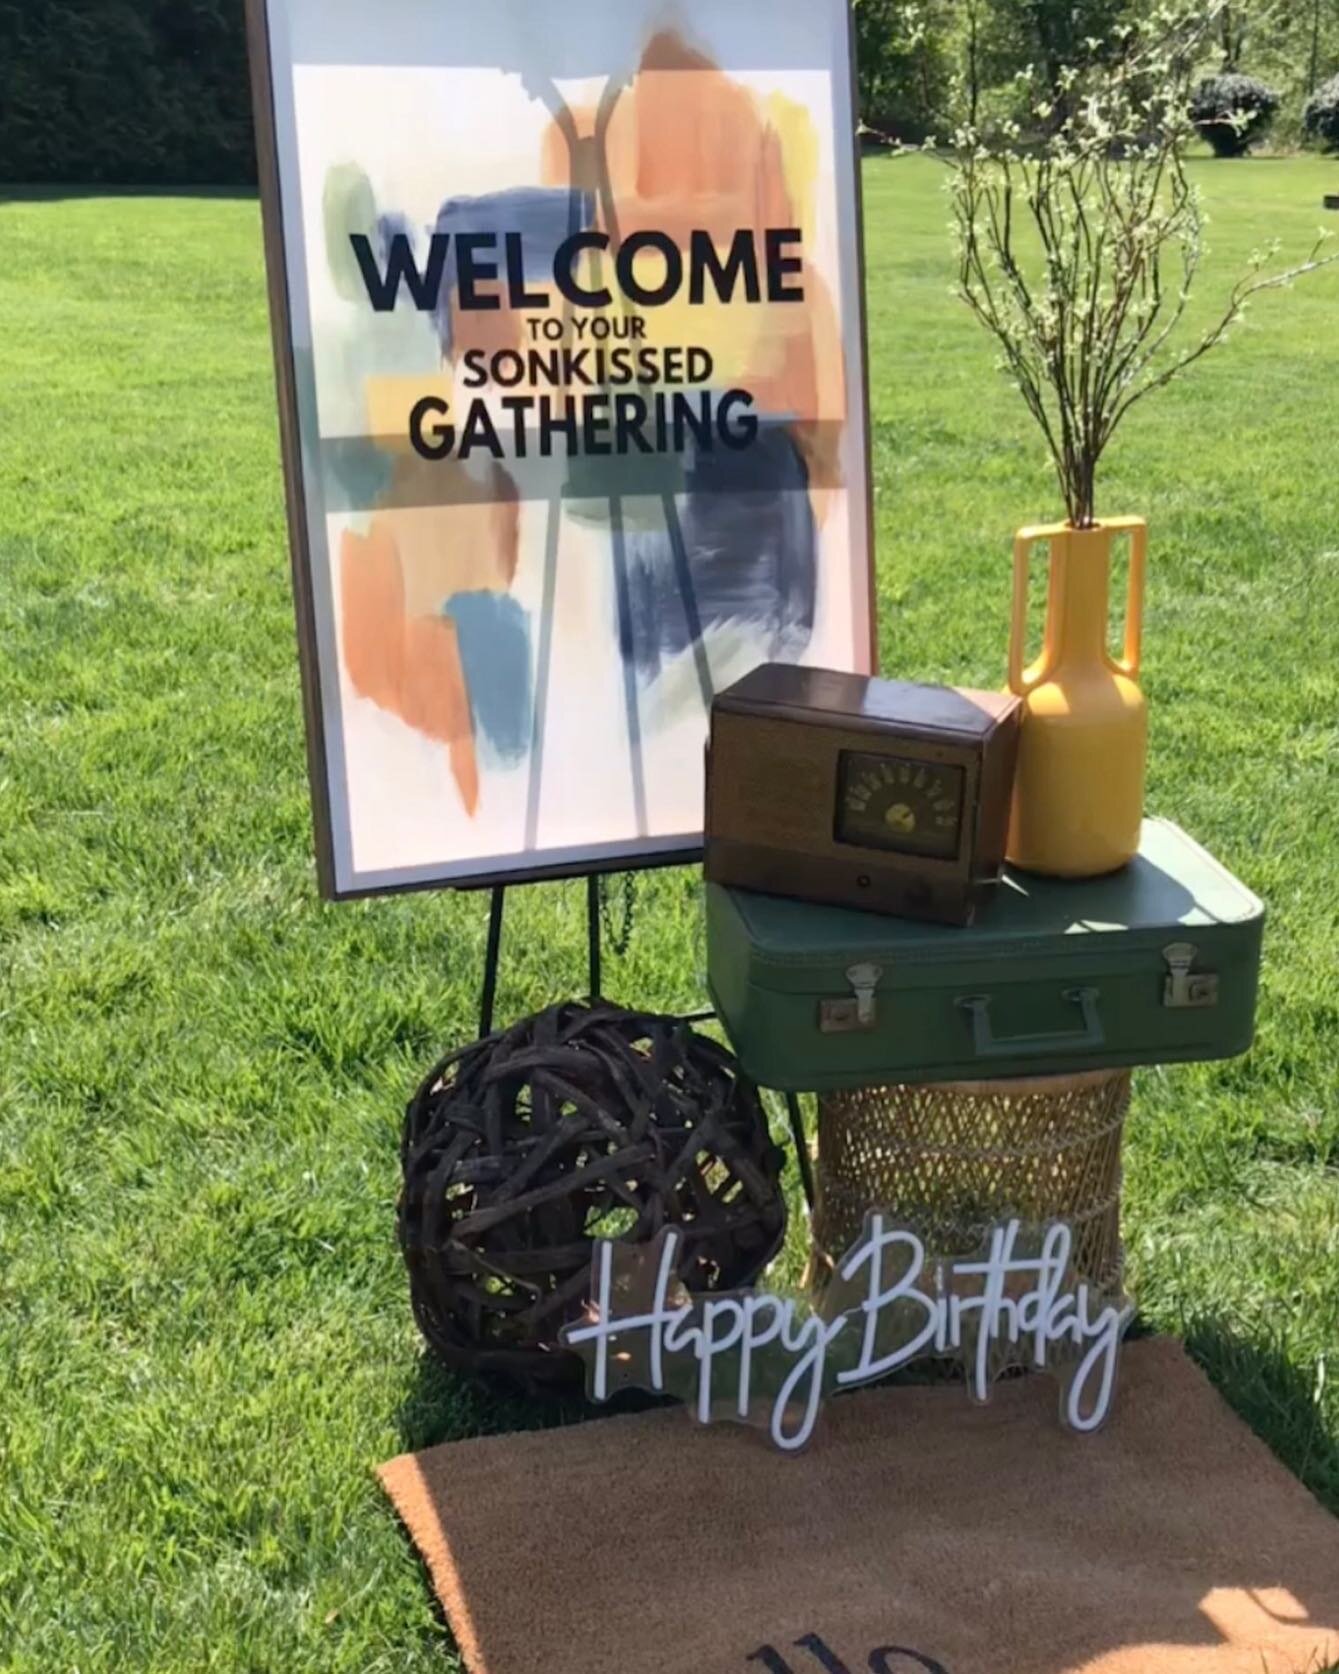 Have you been wondering what to do for your loved one for their birthday? You've seen this post for a reason!! Let us help you create a birthday they won't forget. They will thank you forever!
&bull;
&bull;
#birthdayideas #dinnersetup #picnic #balloo